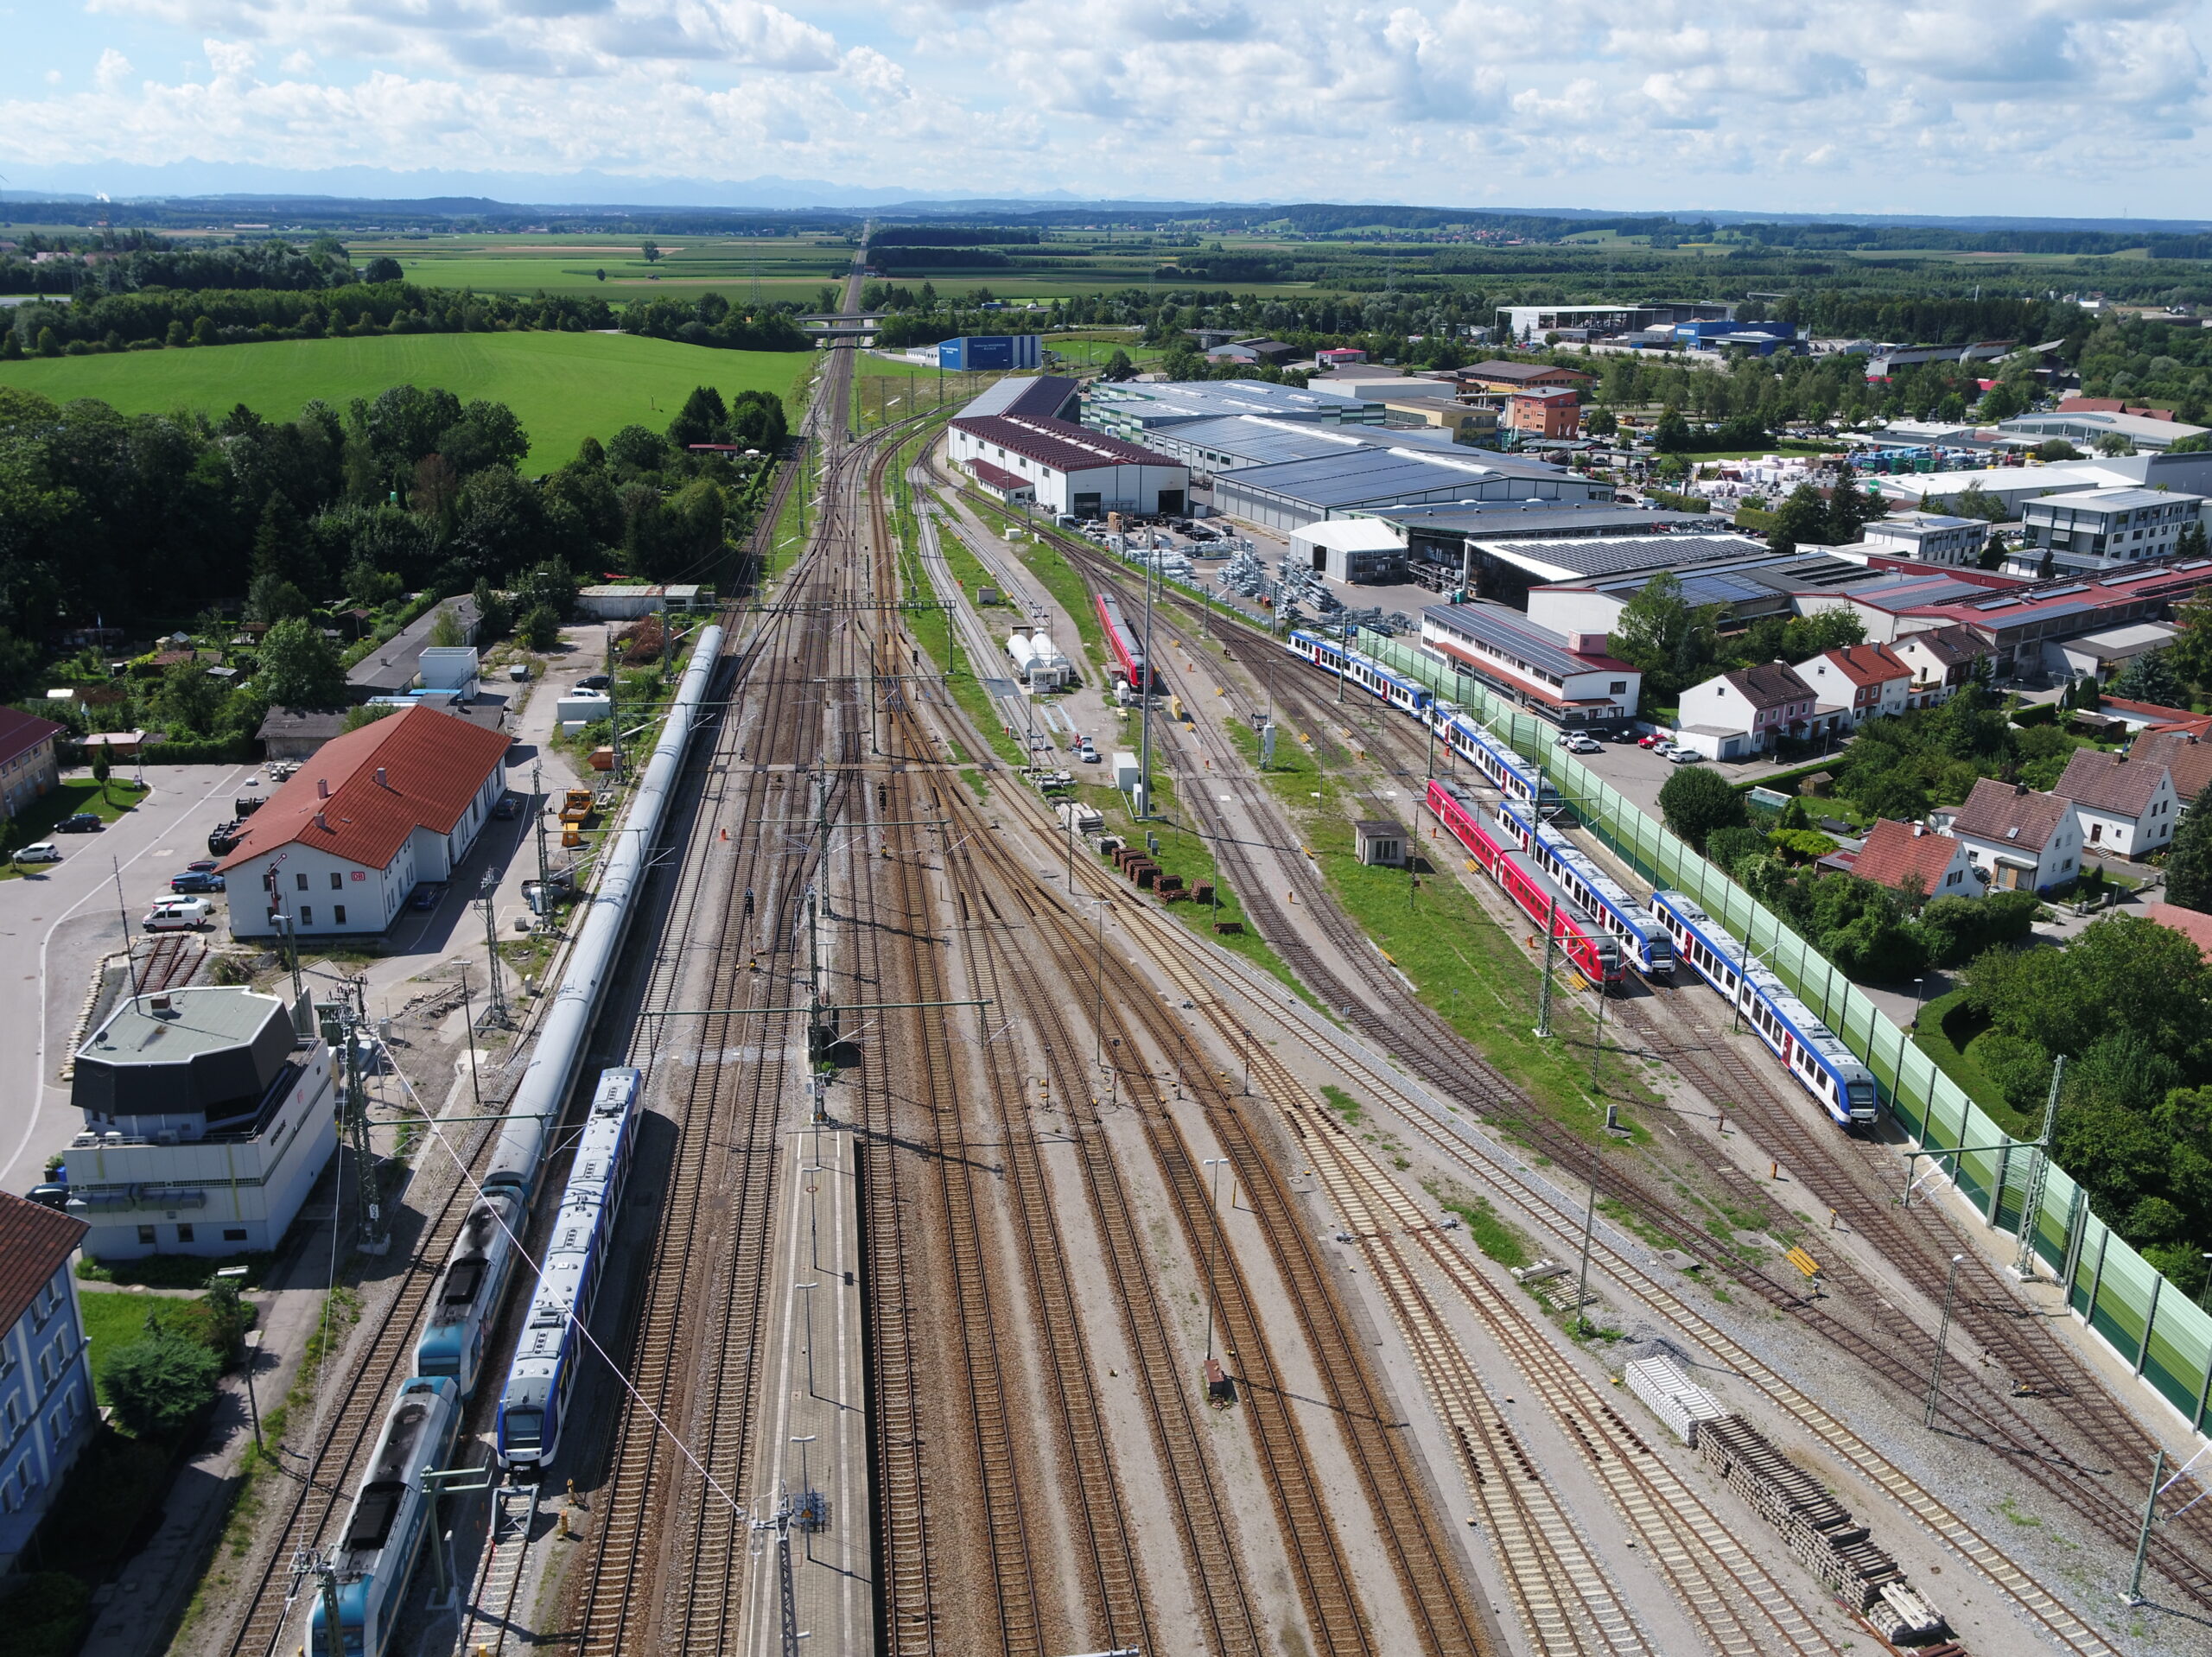 Rail Electrification - line upgrade 48 multicopter image 3 - central station Buchloe, Germany from above